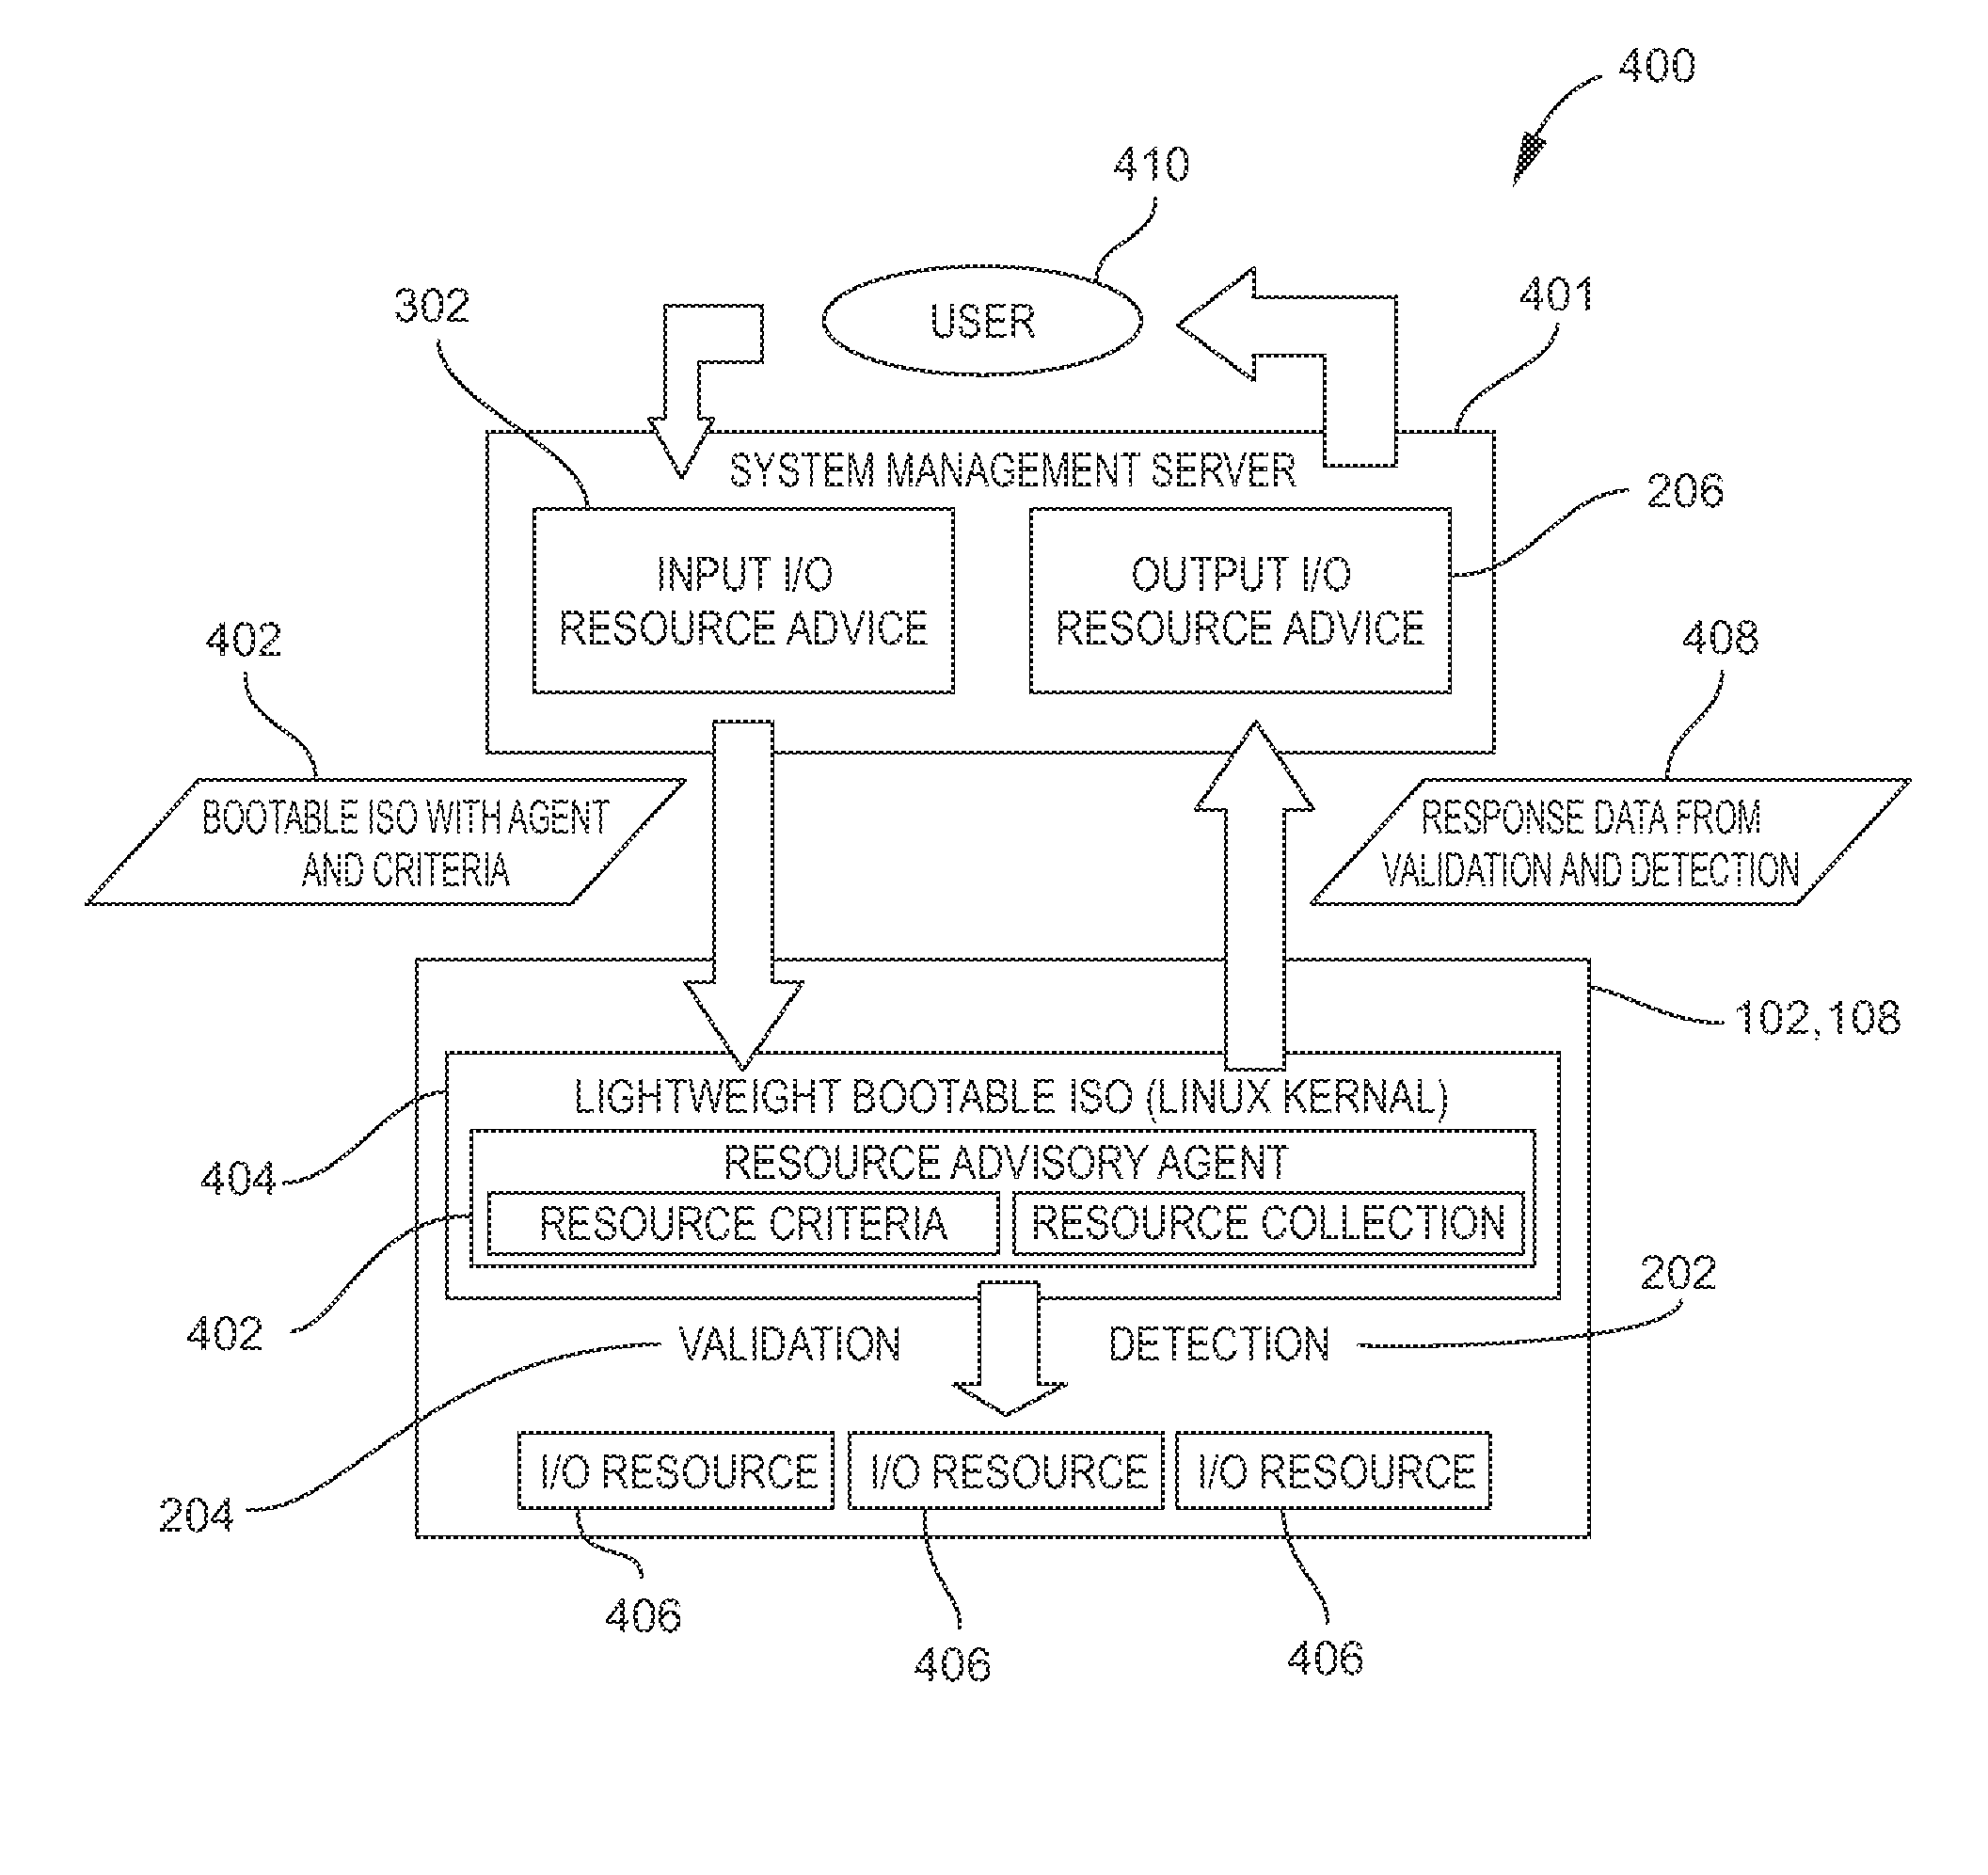 Resource advisor for automated bare-metal operating system installation